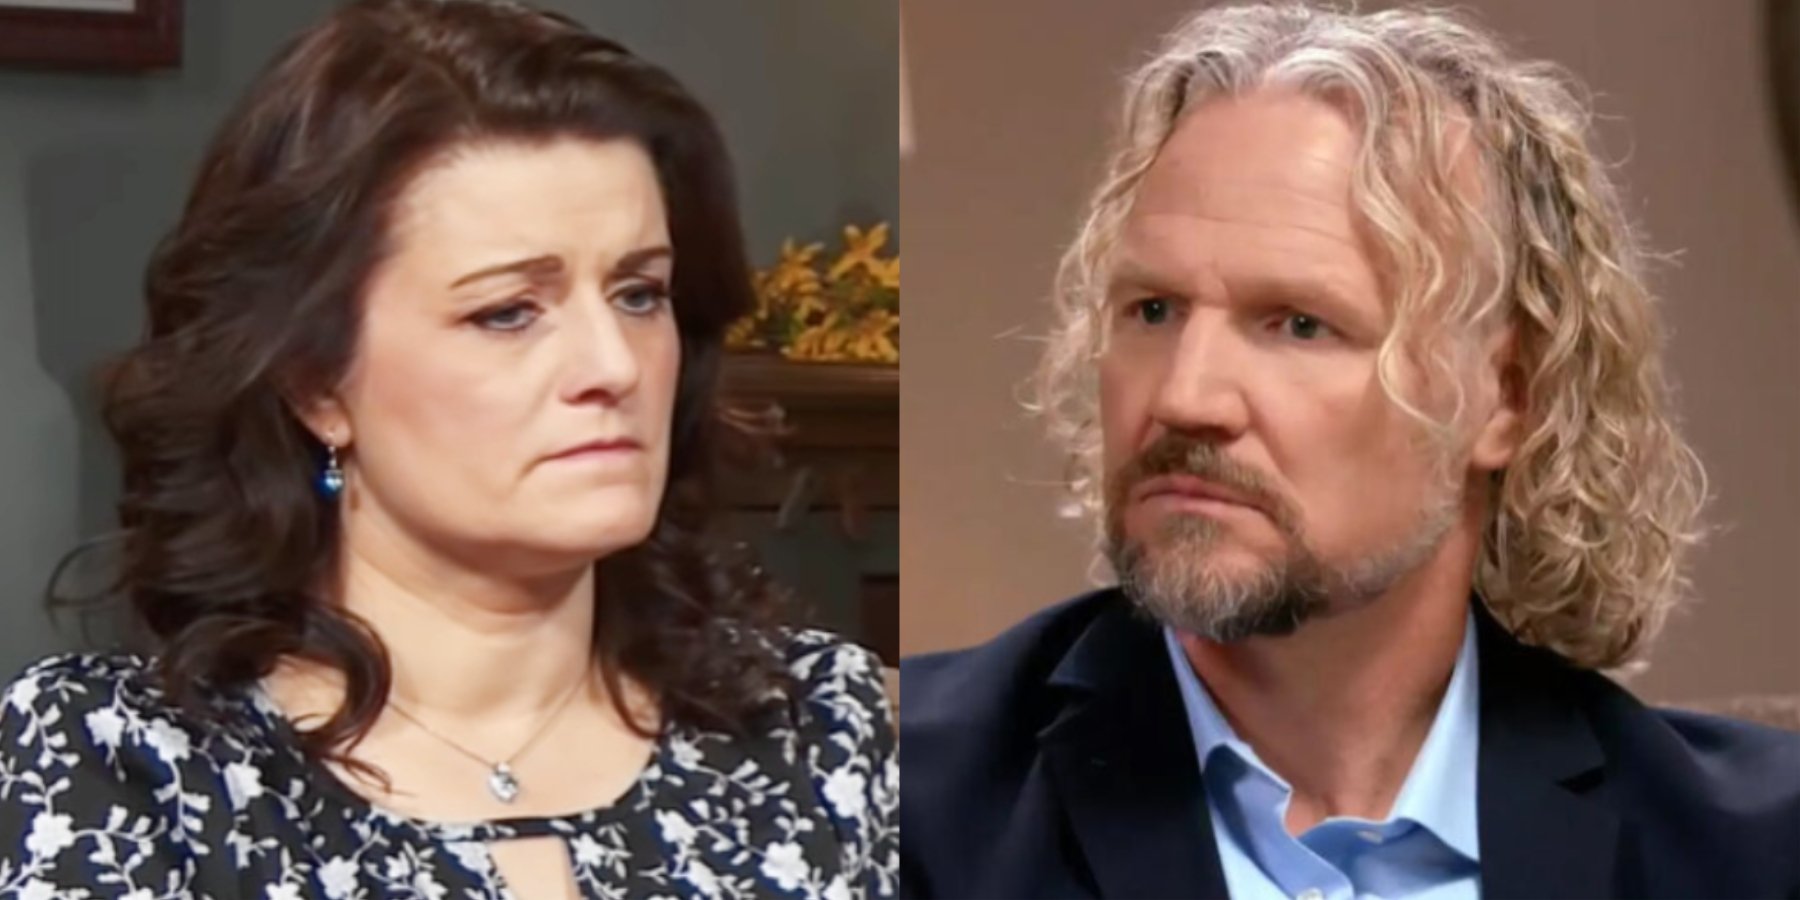 'Sister Wives' Robyn and Kody Brown in a side by side photograph.